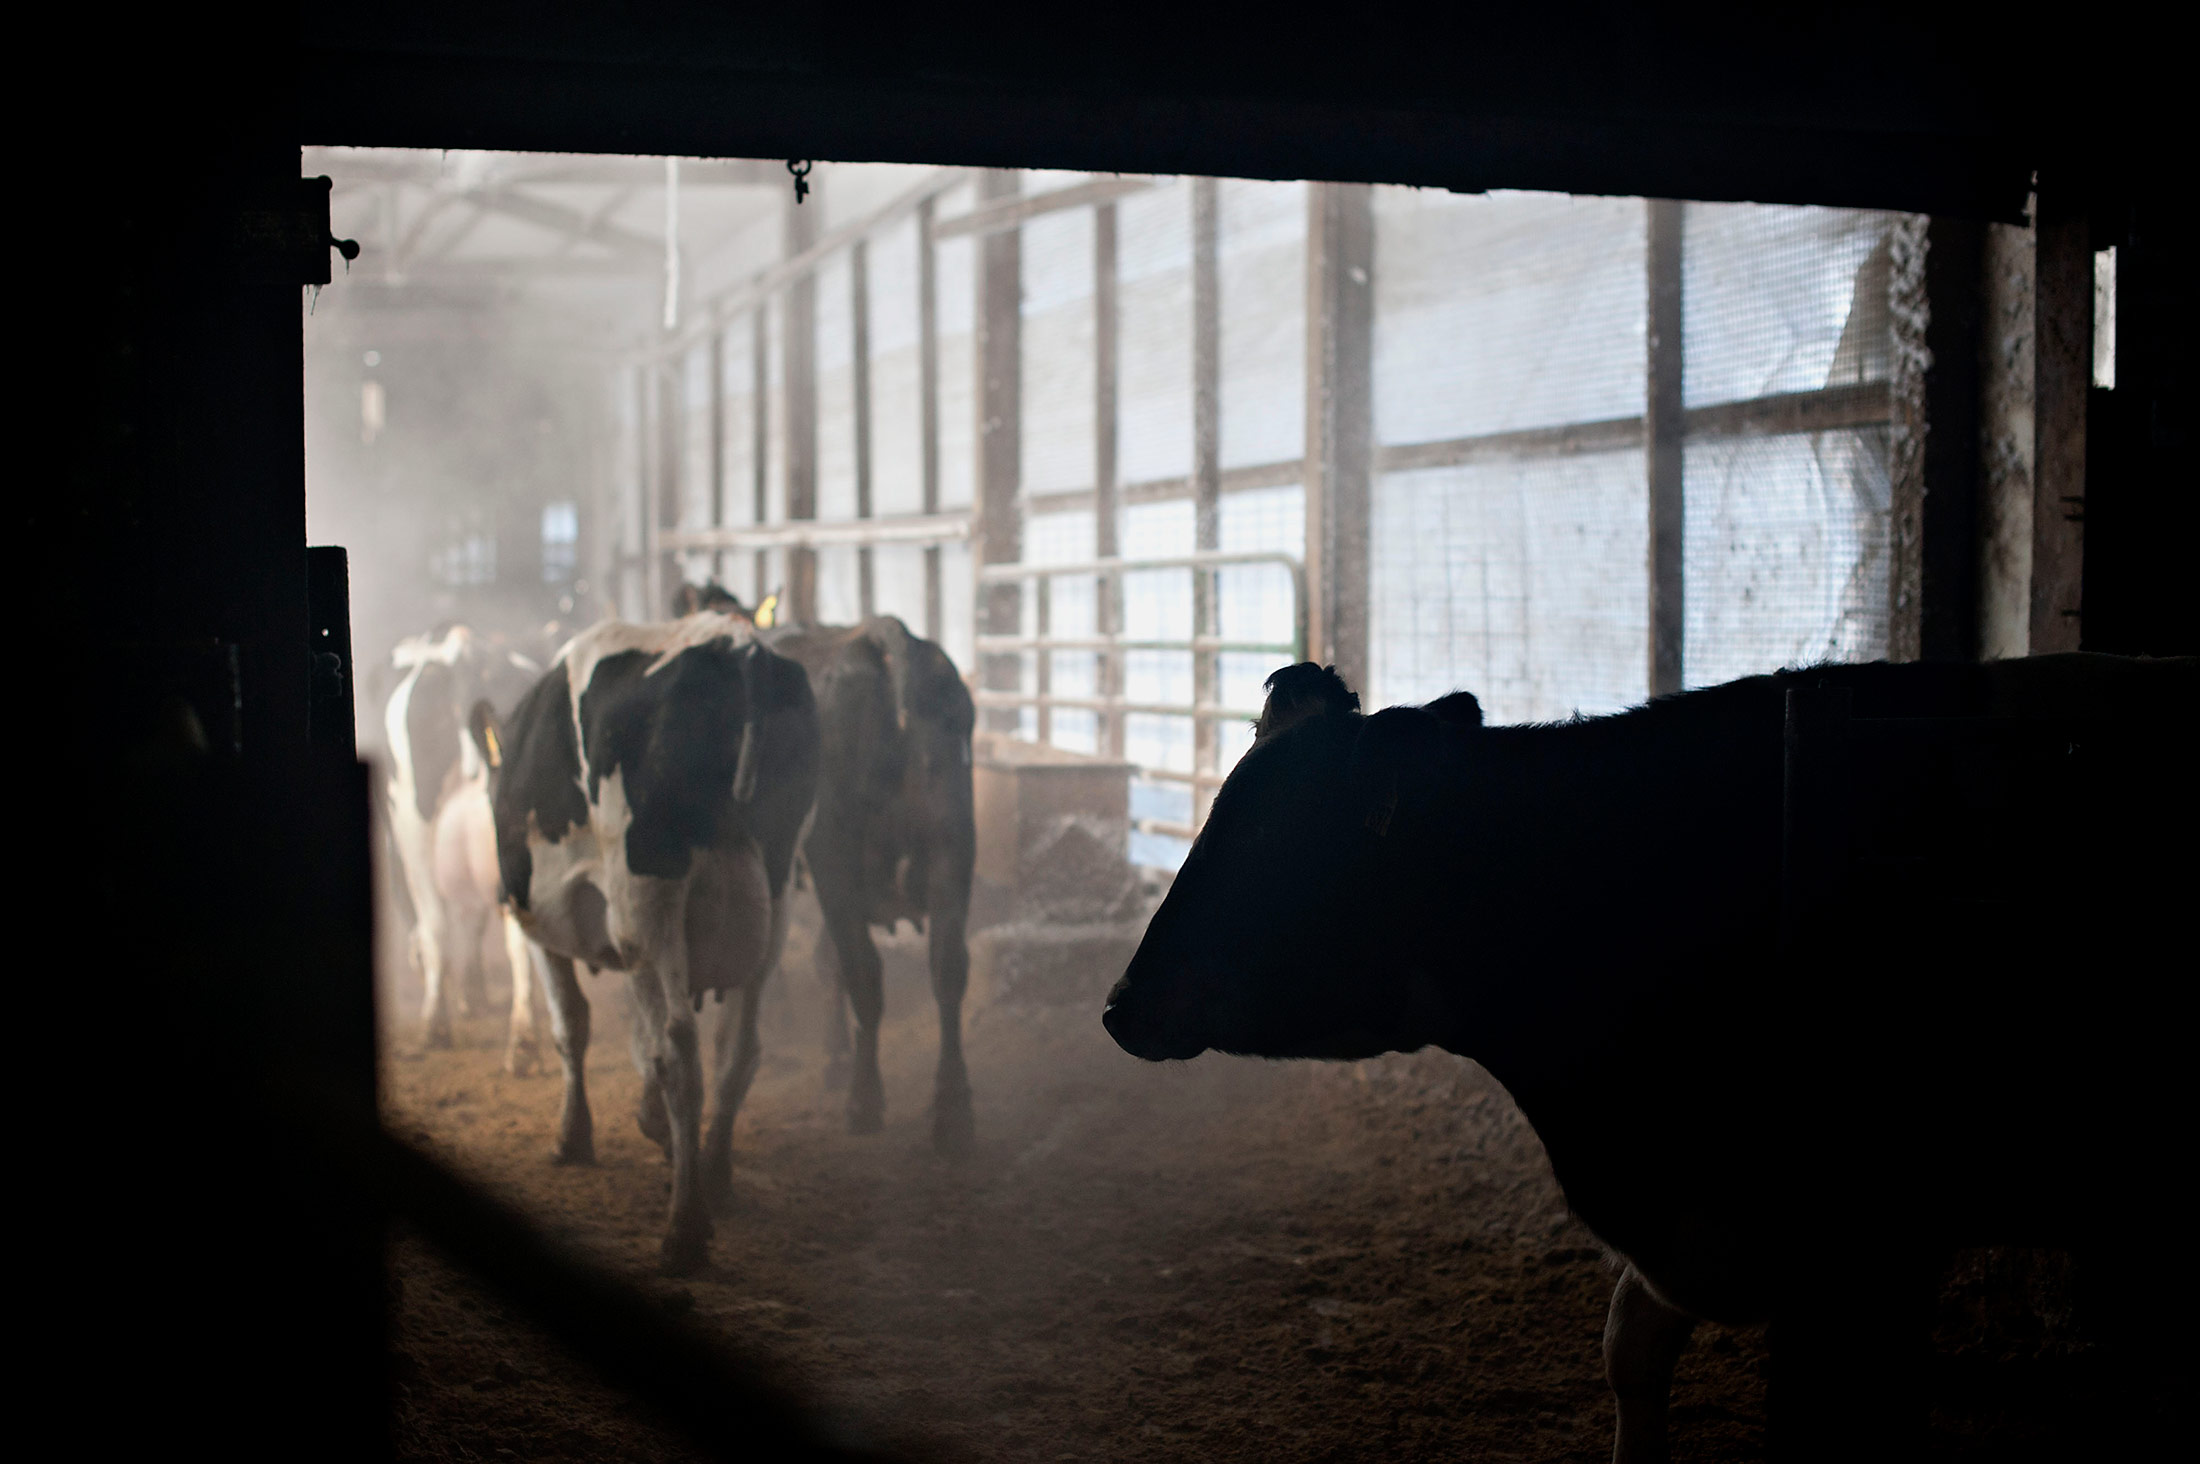 Cattle return to a barn after being milked at a dairy farm in Illinois.
